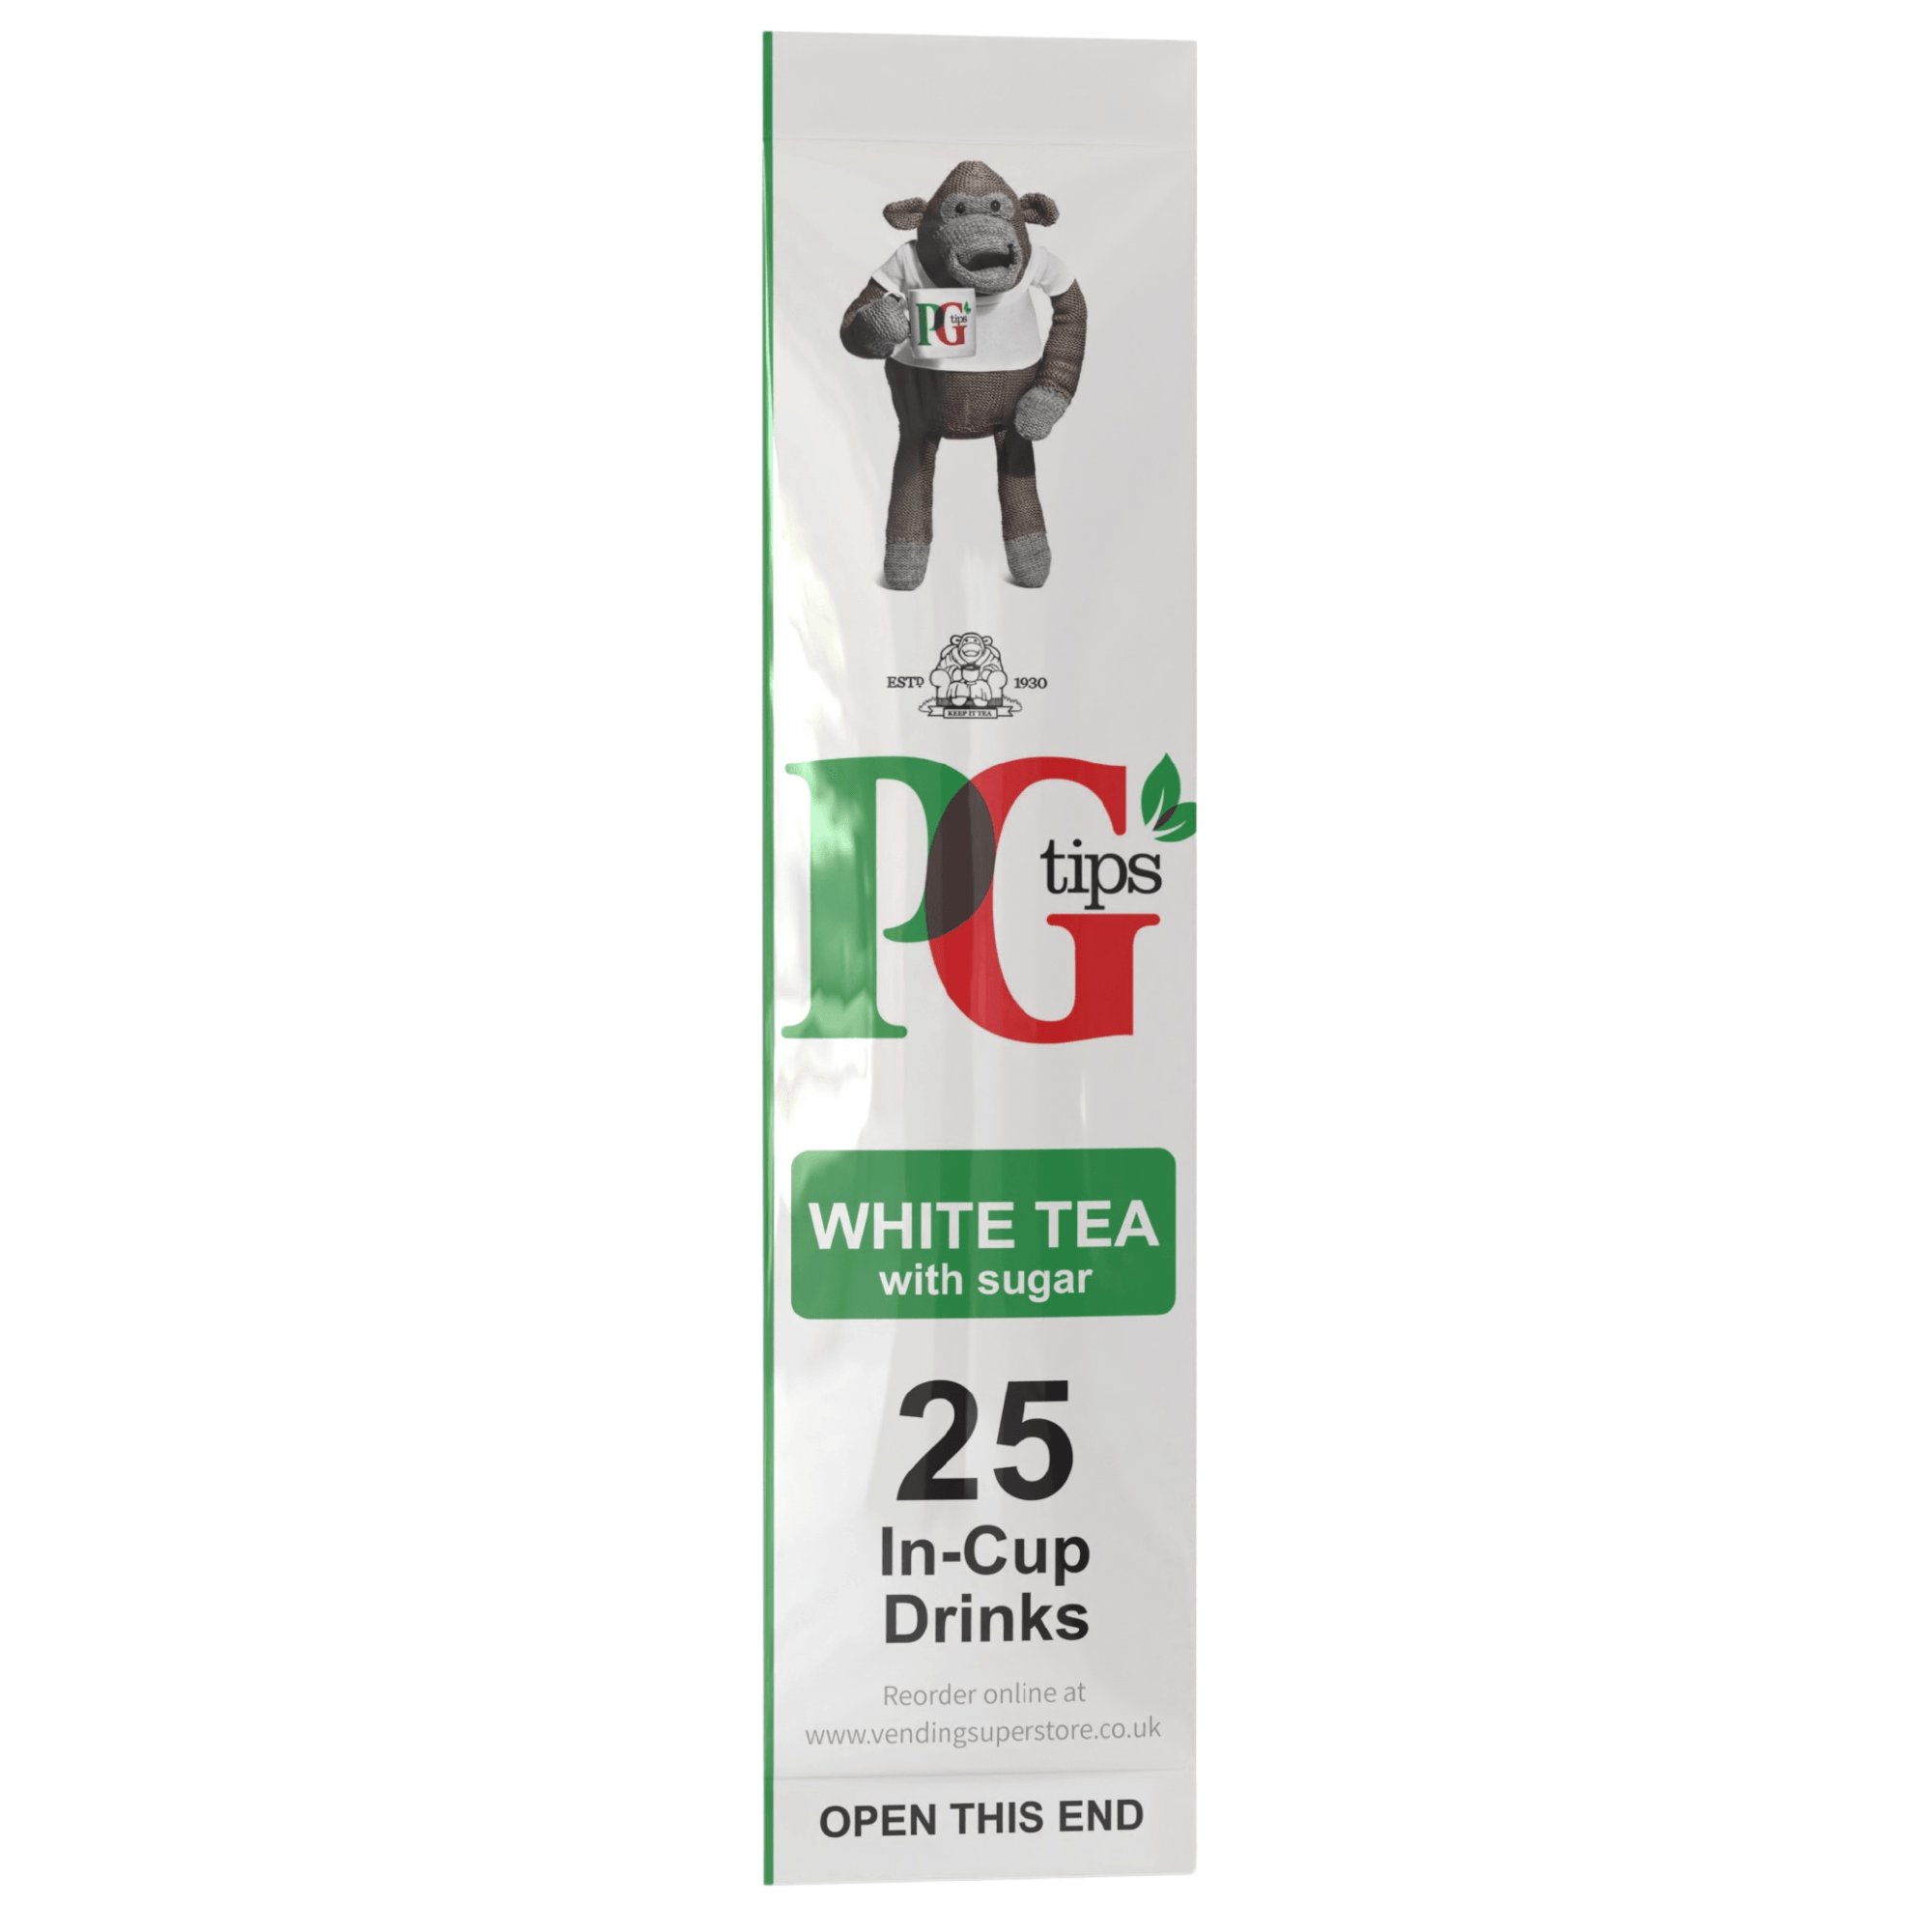 Incup Vending Drinks - PG Tips Tagged Tea White With Sugar - Sleeve of 25 Cups - Vending Superstore